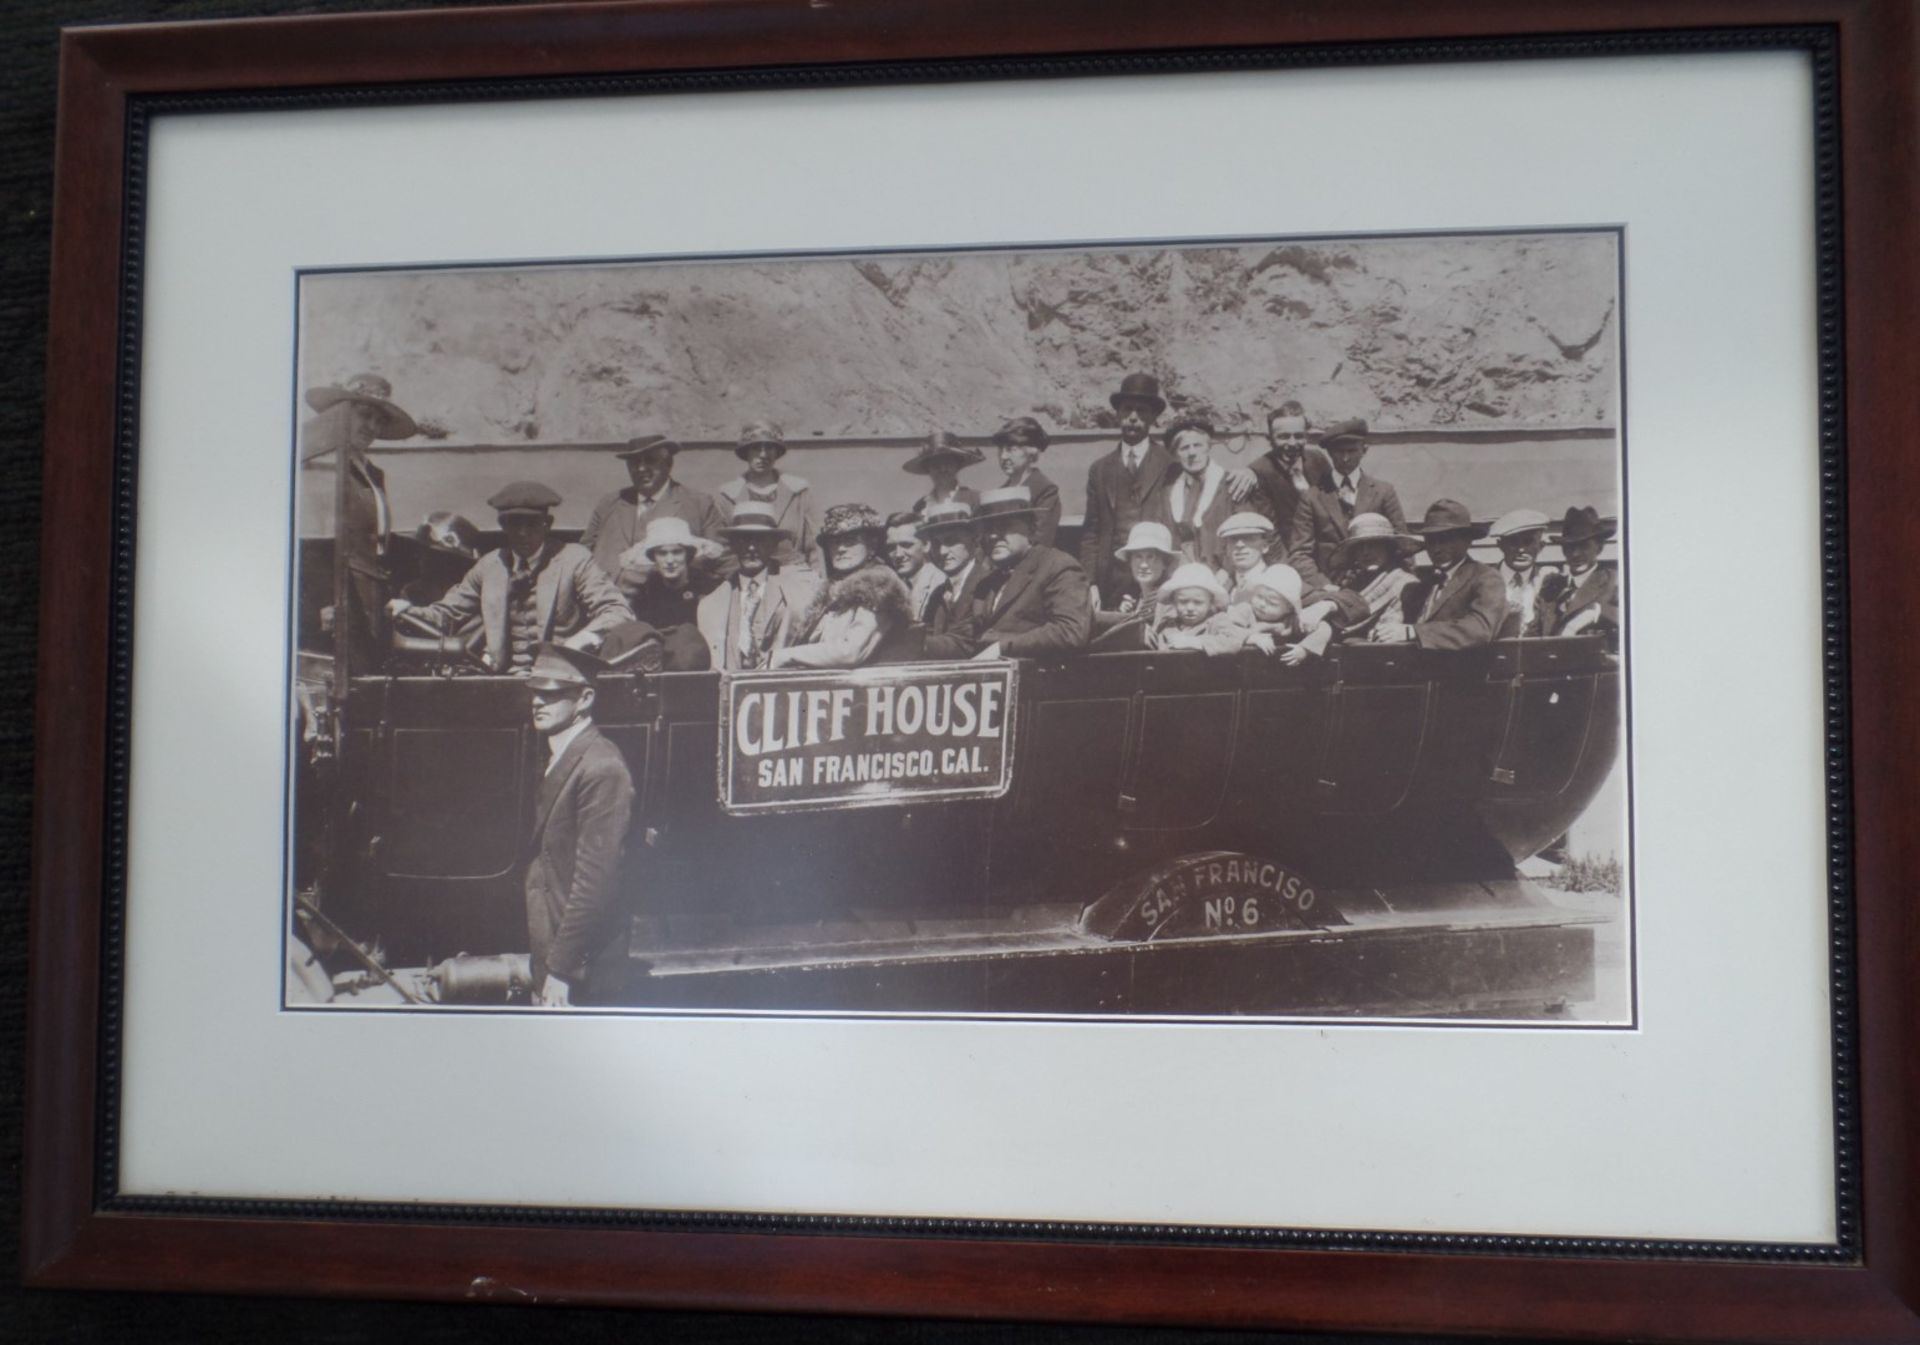 Framed Photos - Groups of people in Cliff House Shuttles - Image 2 of 3